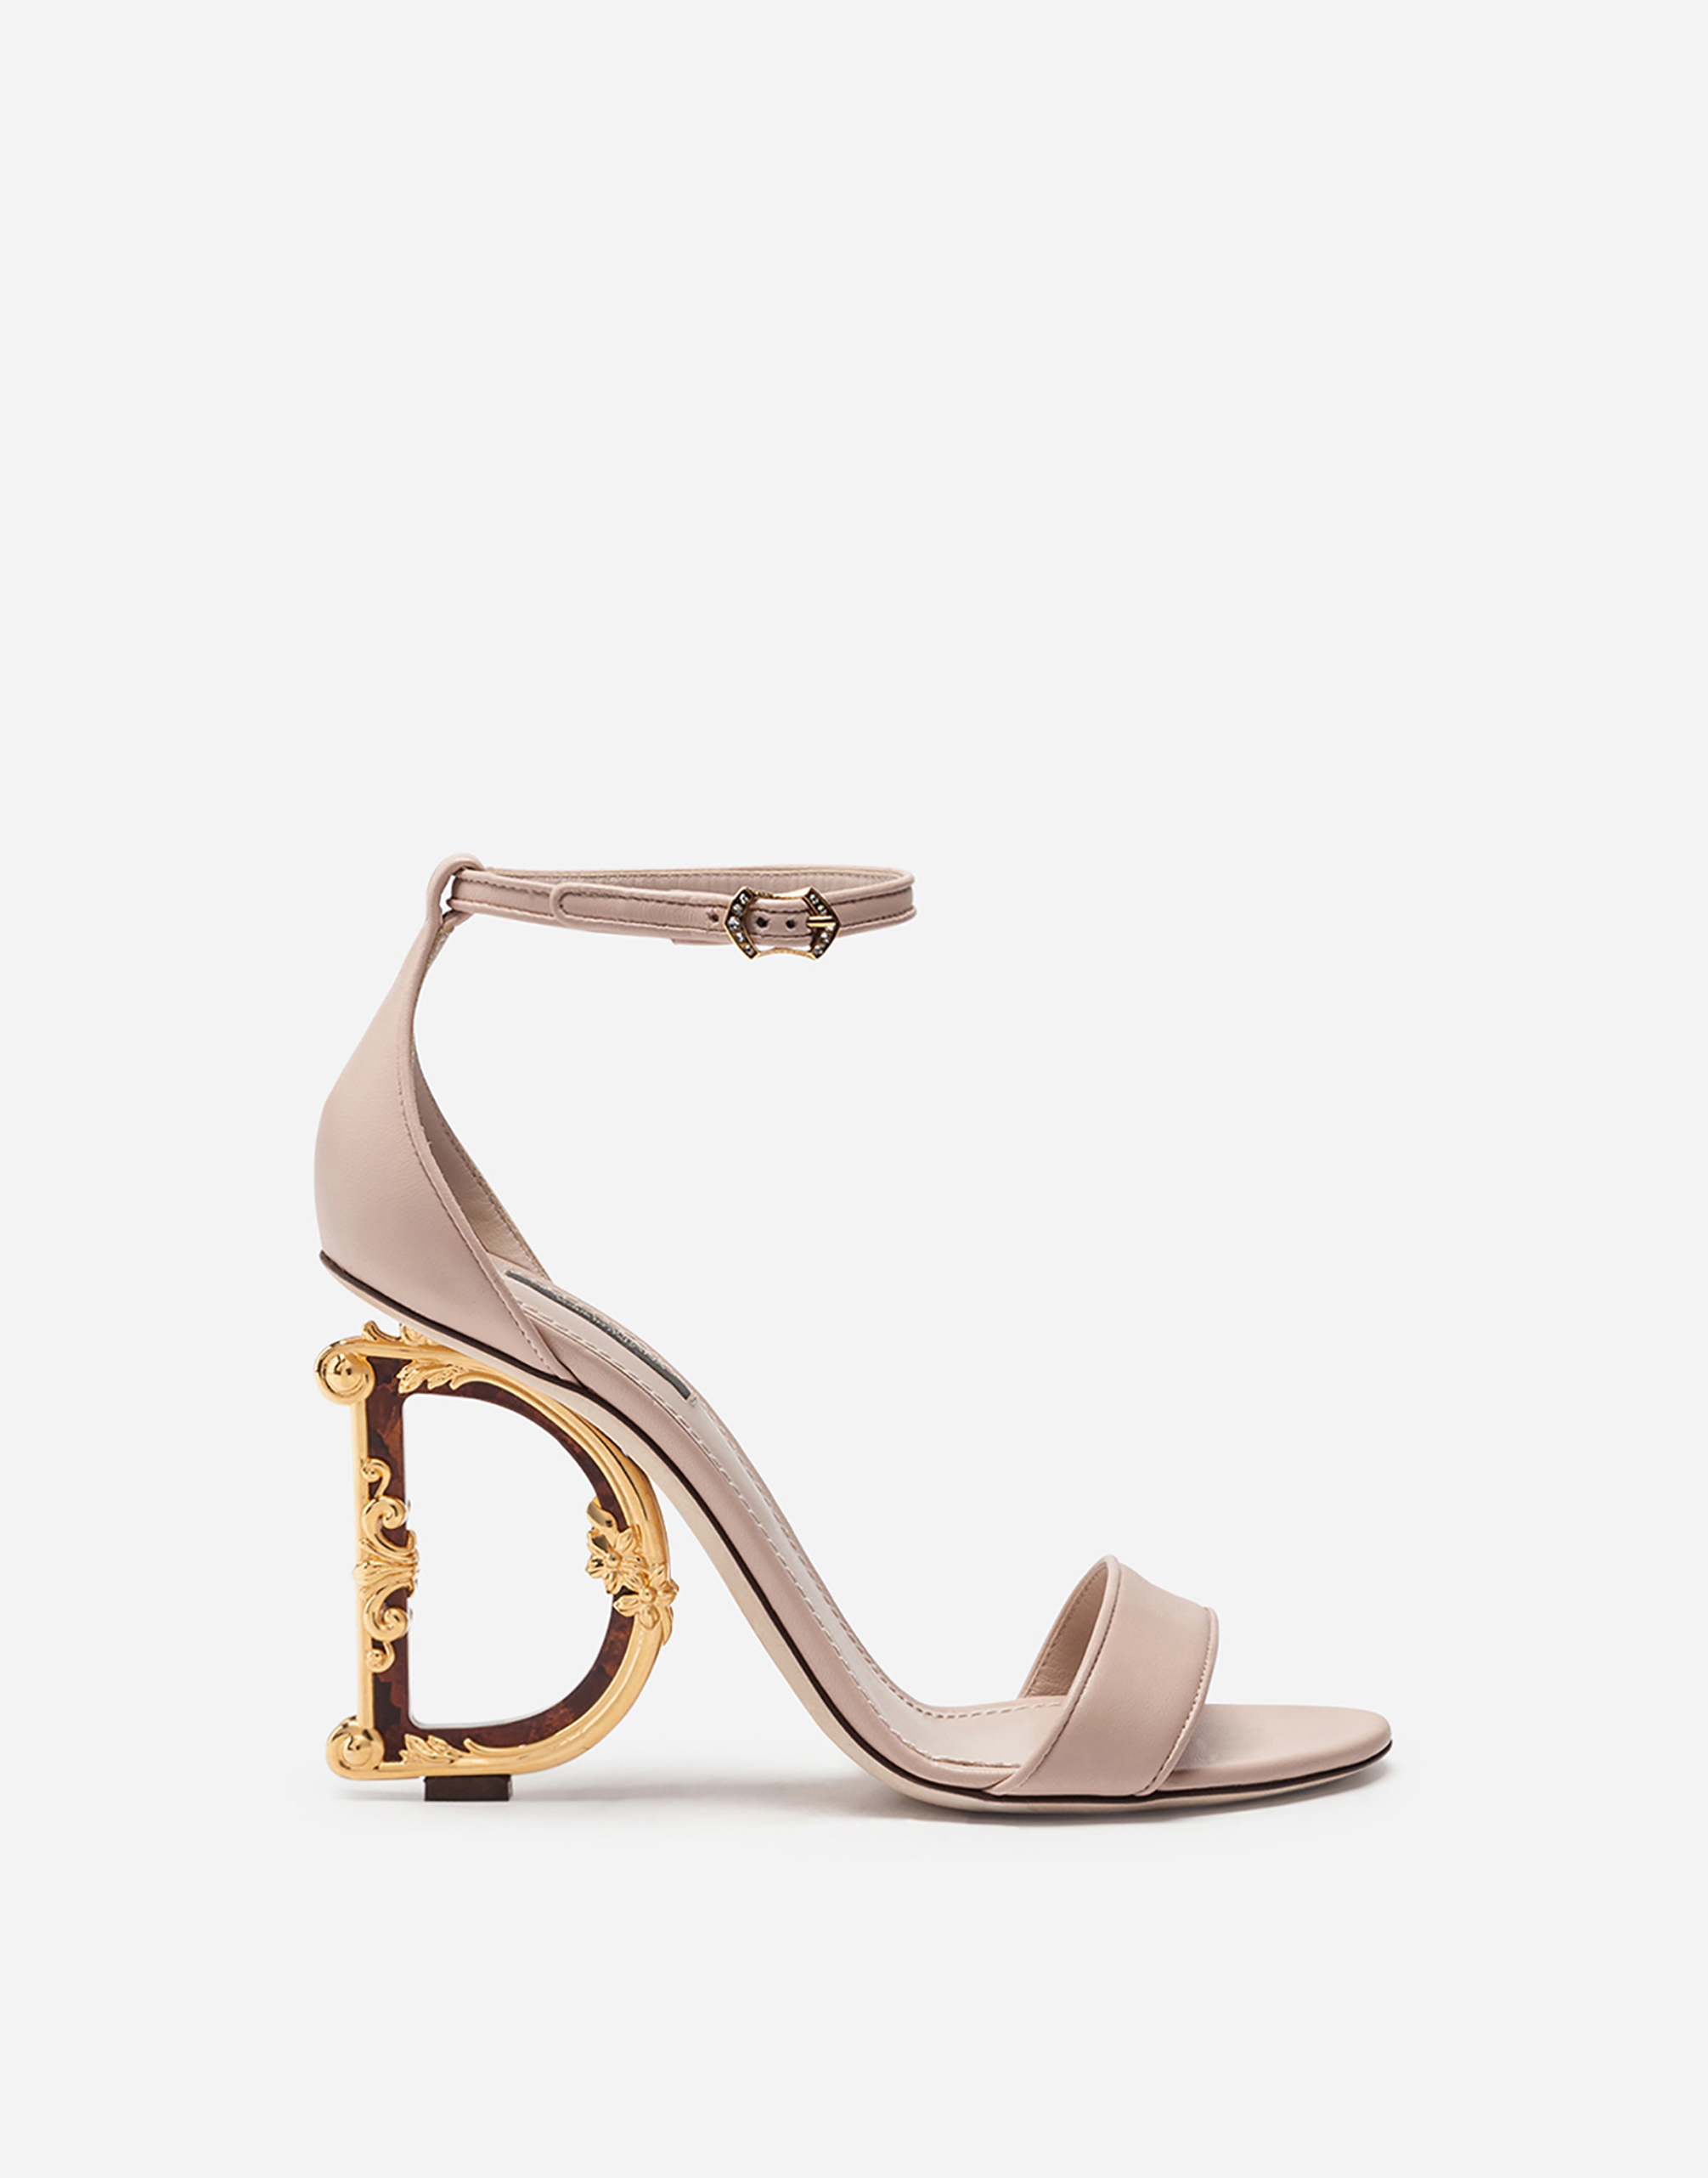 Nappa leather sandals with baroque DG detail in Pale Pink